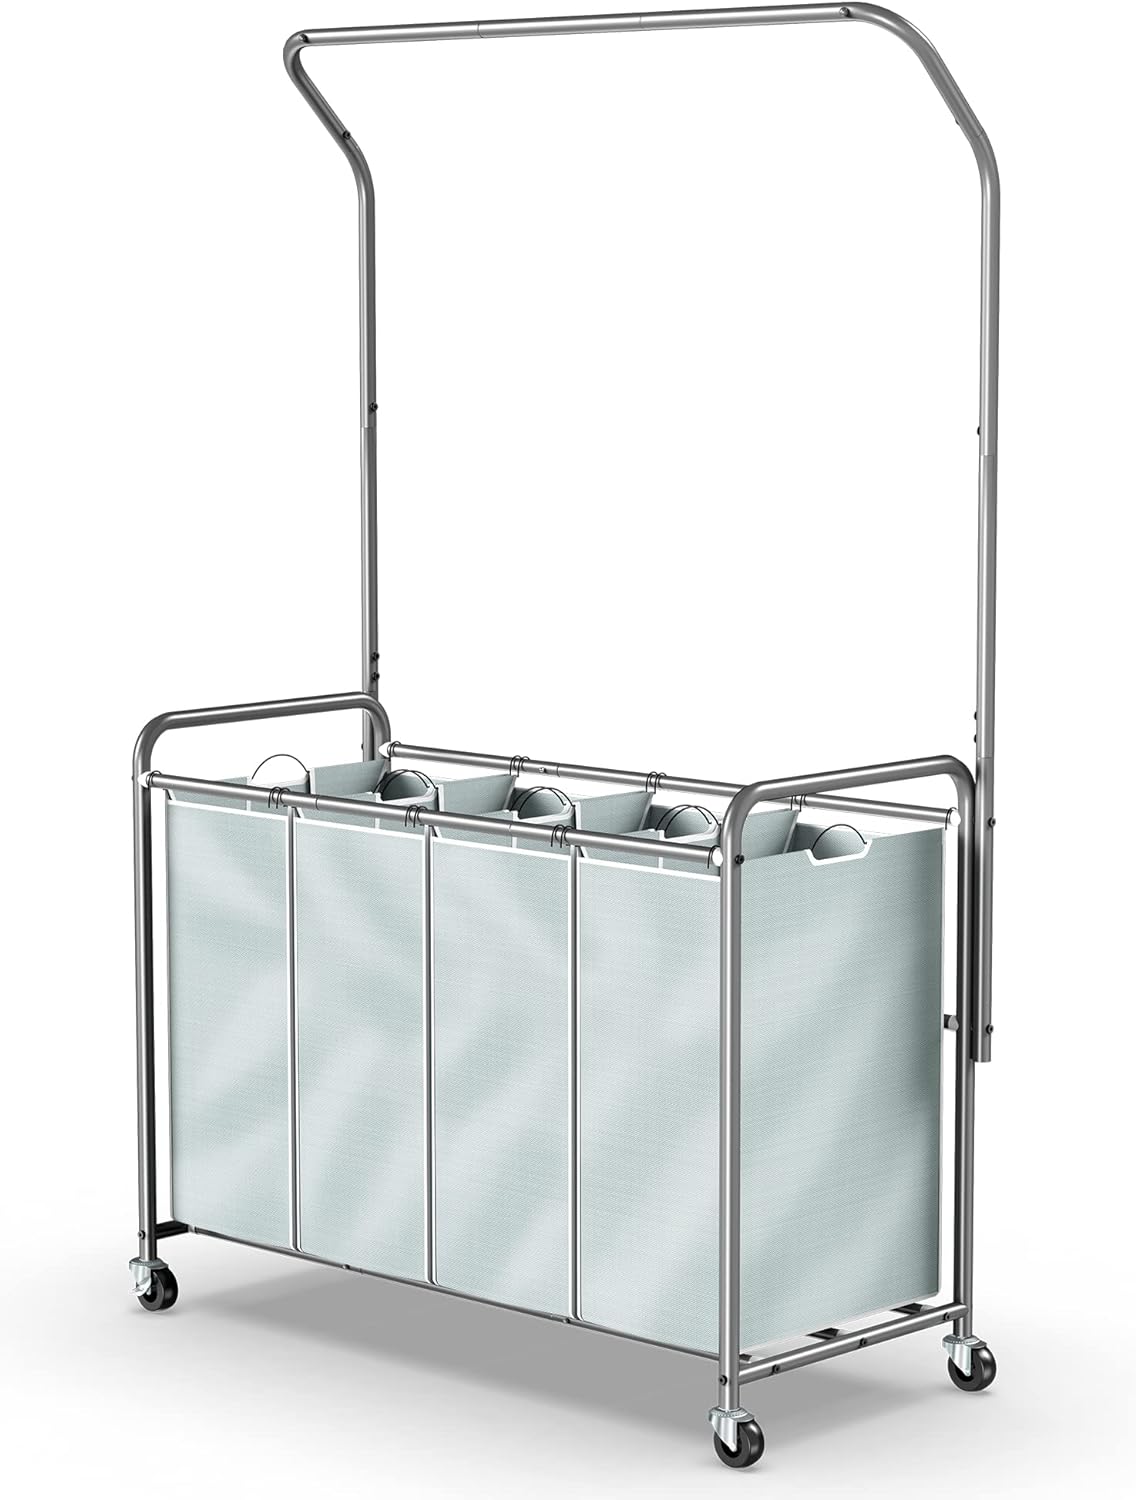 4-Section Laundry Sorter with Hanging Bar, Lockable Wheels, Removable Bags